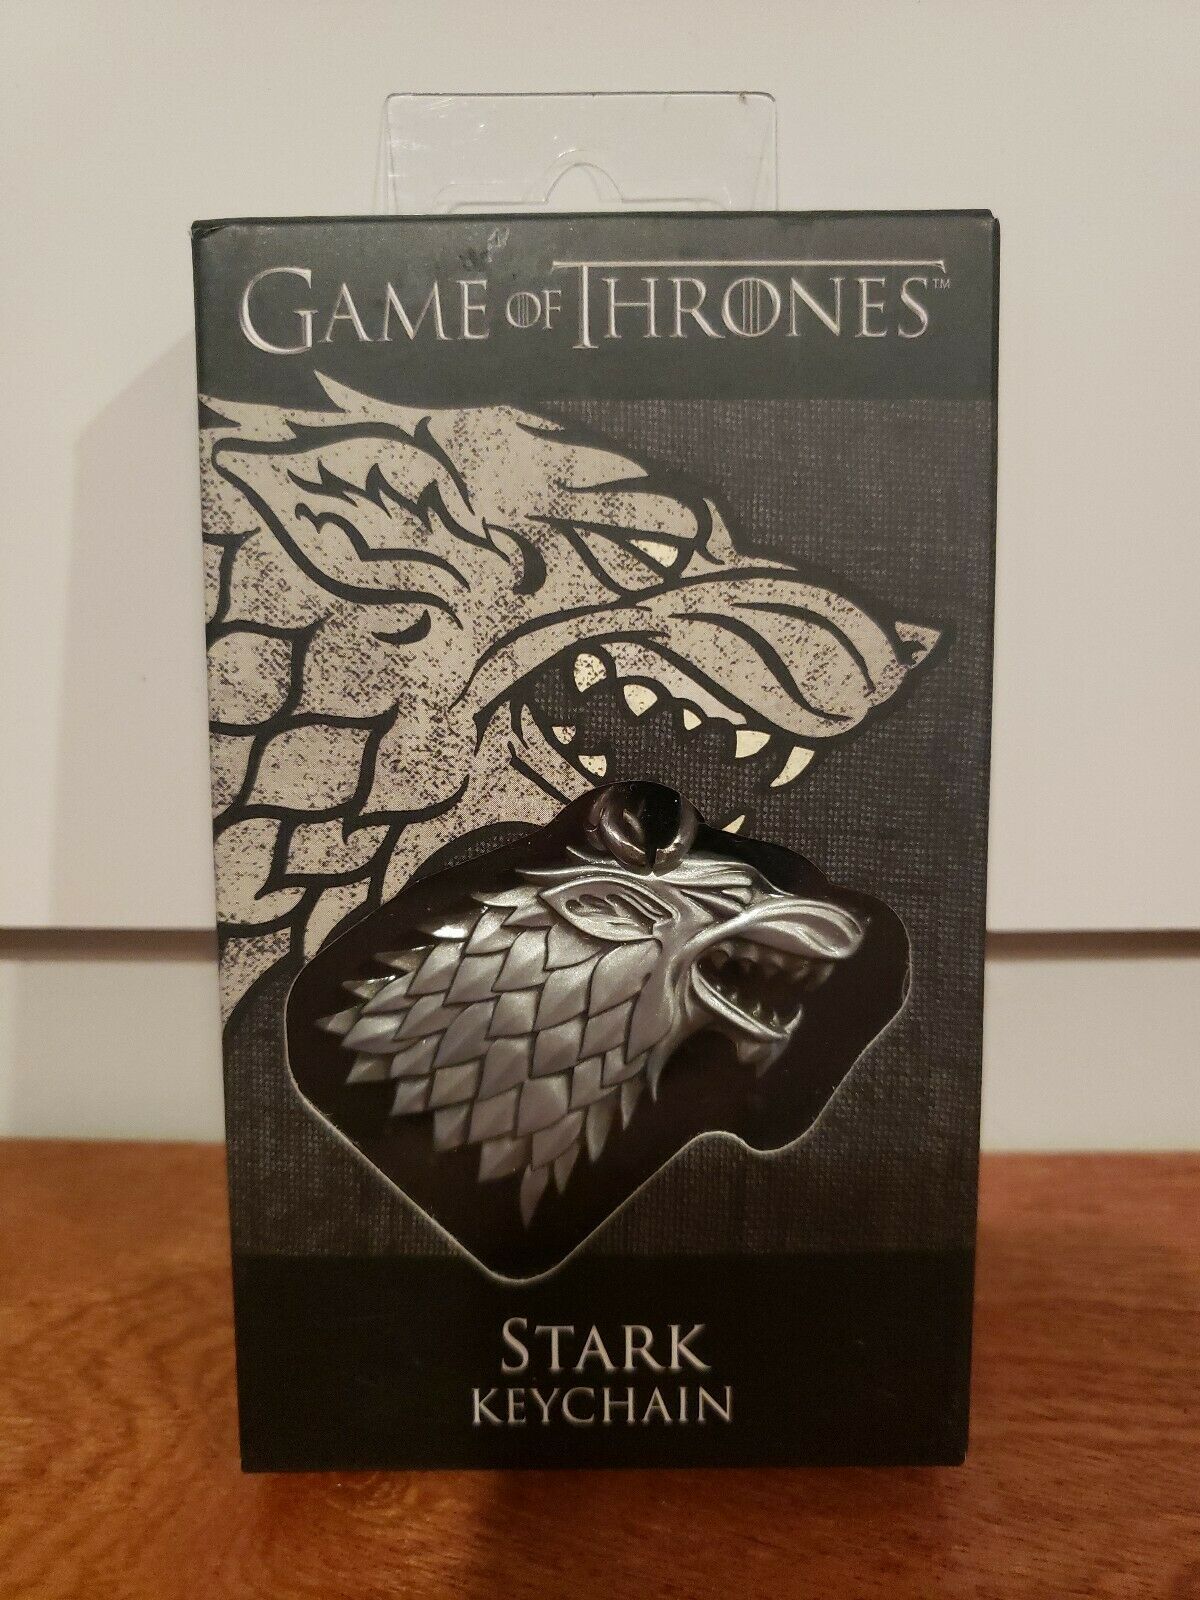 Game Of Thrones Stark Emblem Metal Keychain By The Nobel Collection Die Cast New